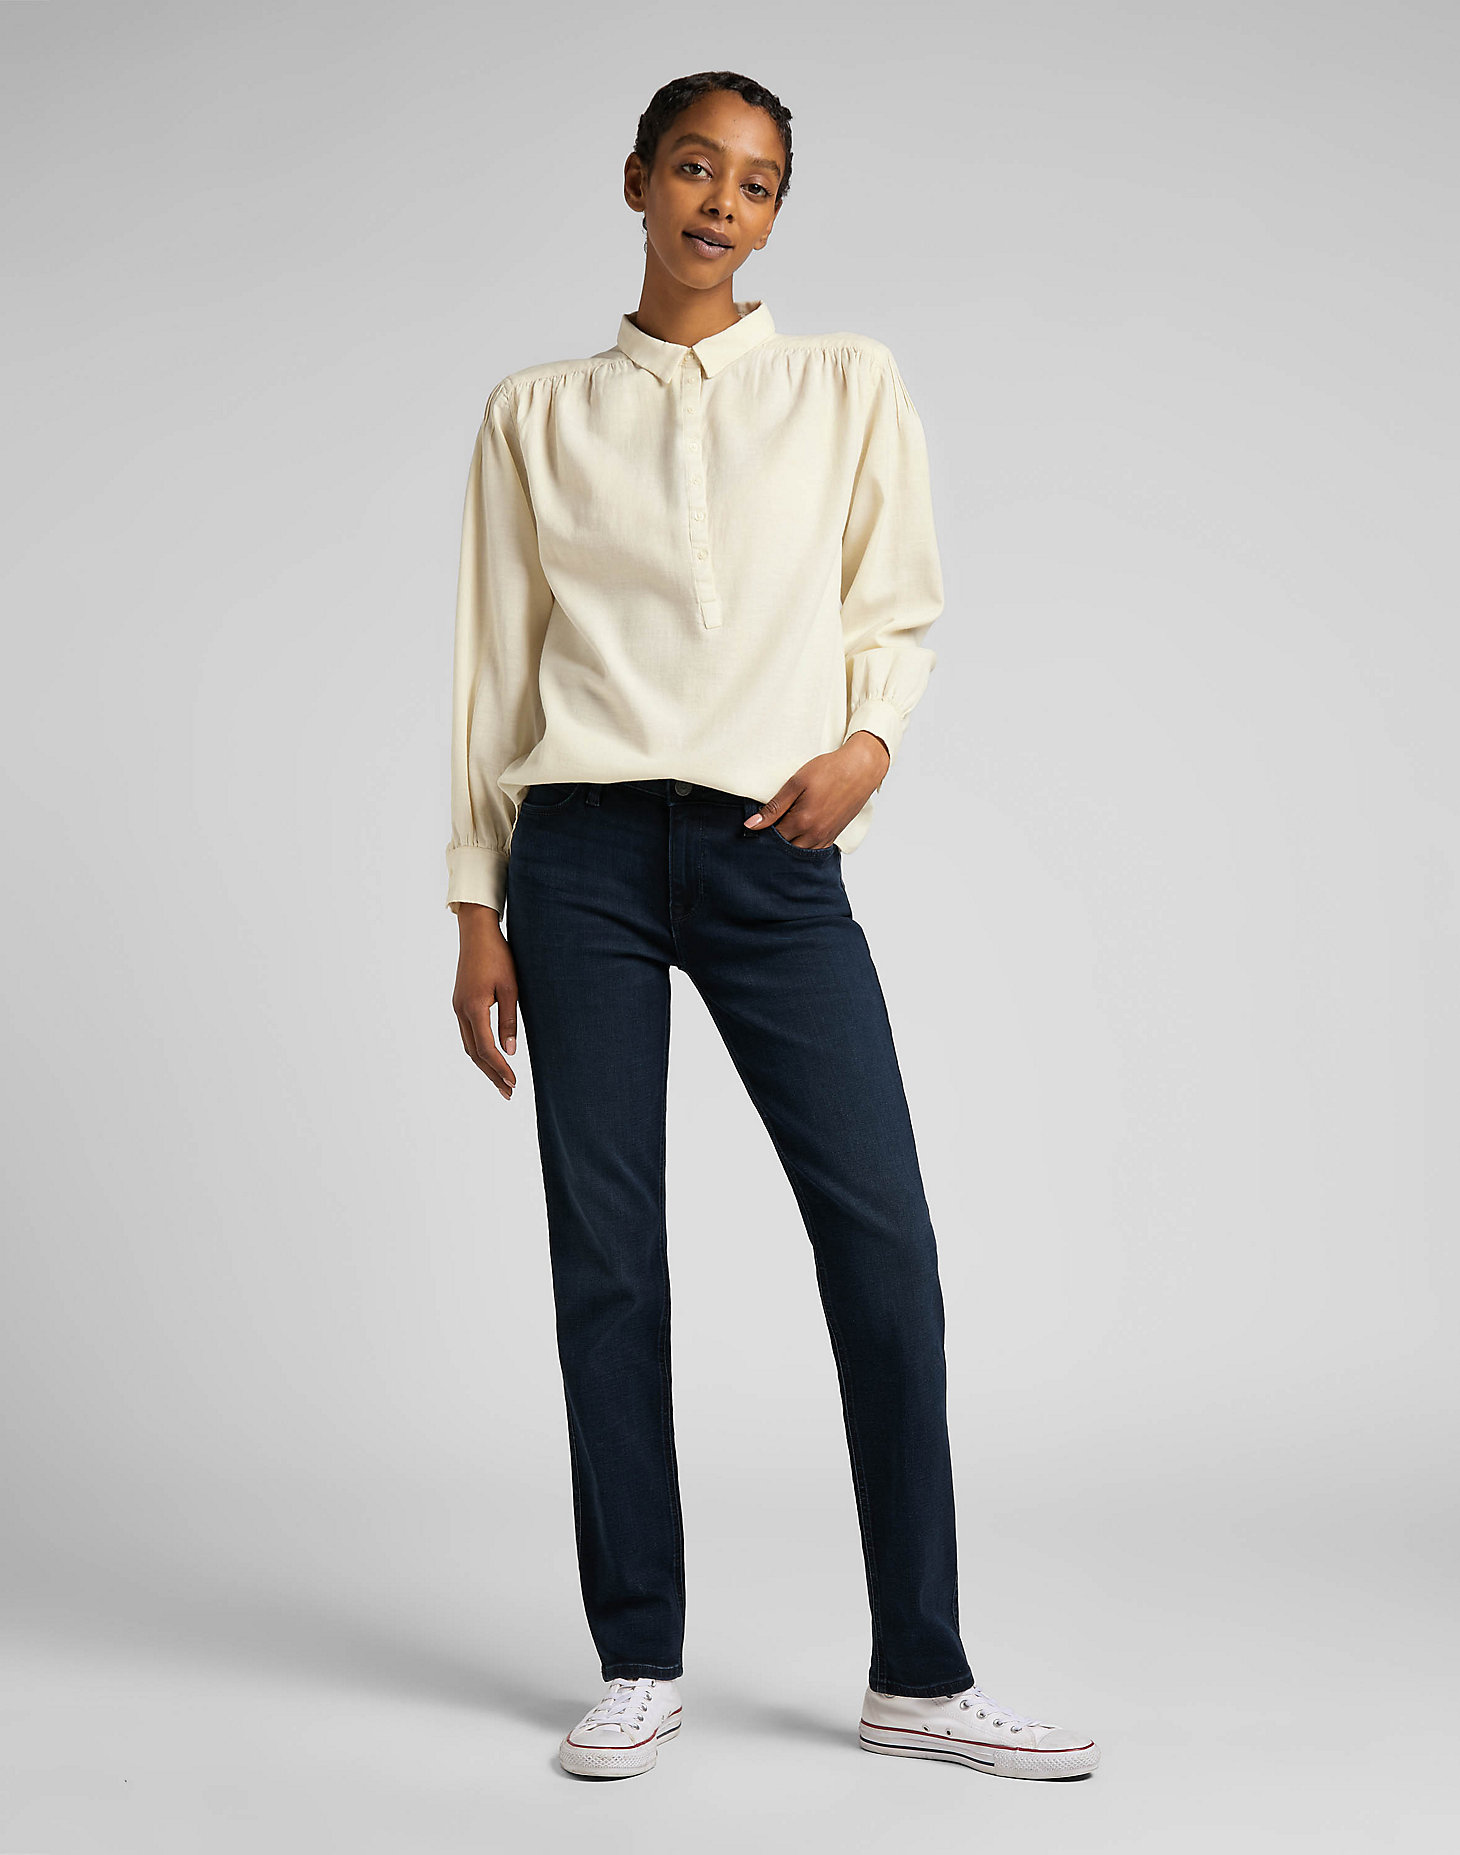 Pintucked Relaxed Blouse in Ecru alternative view 2